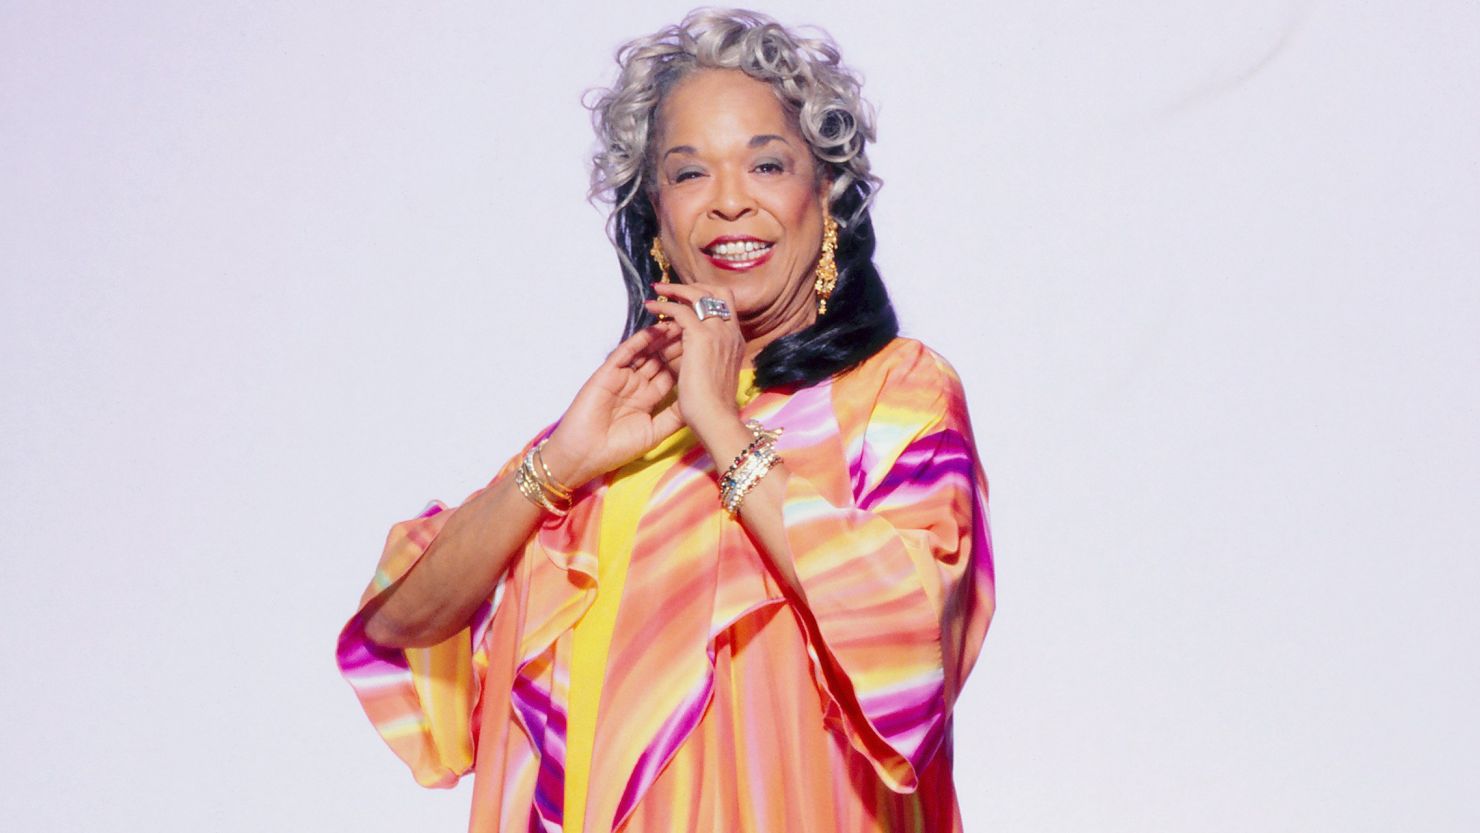 Actress and singer Della Reese 